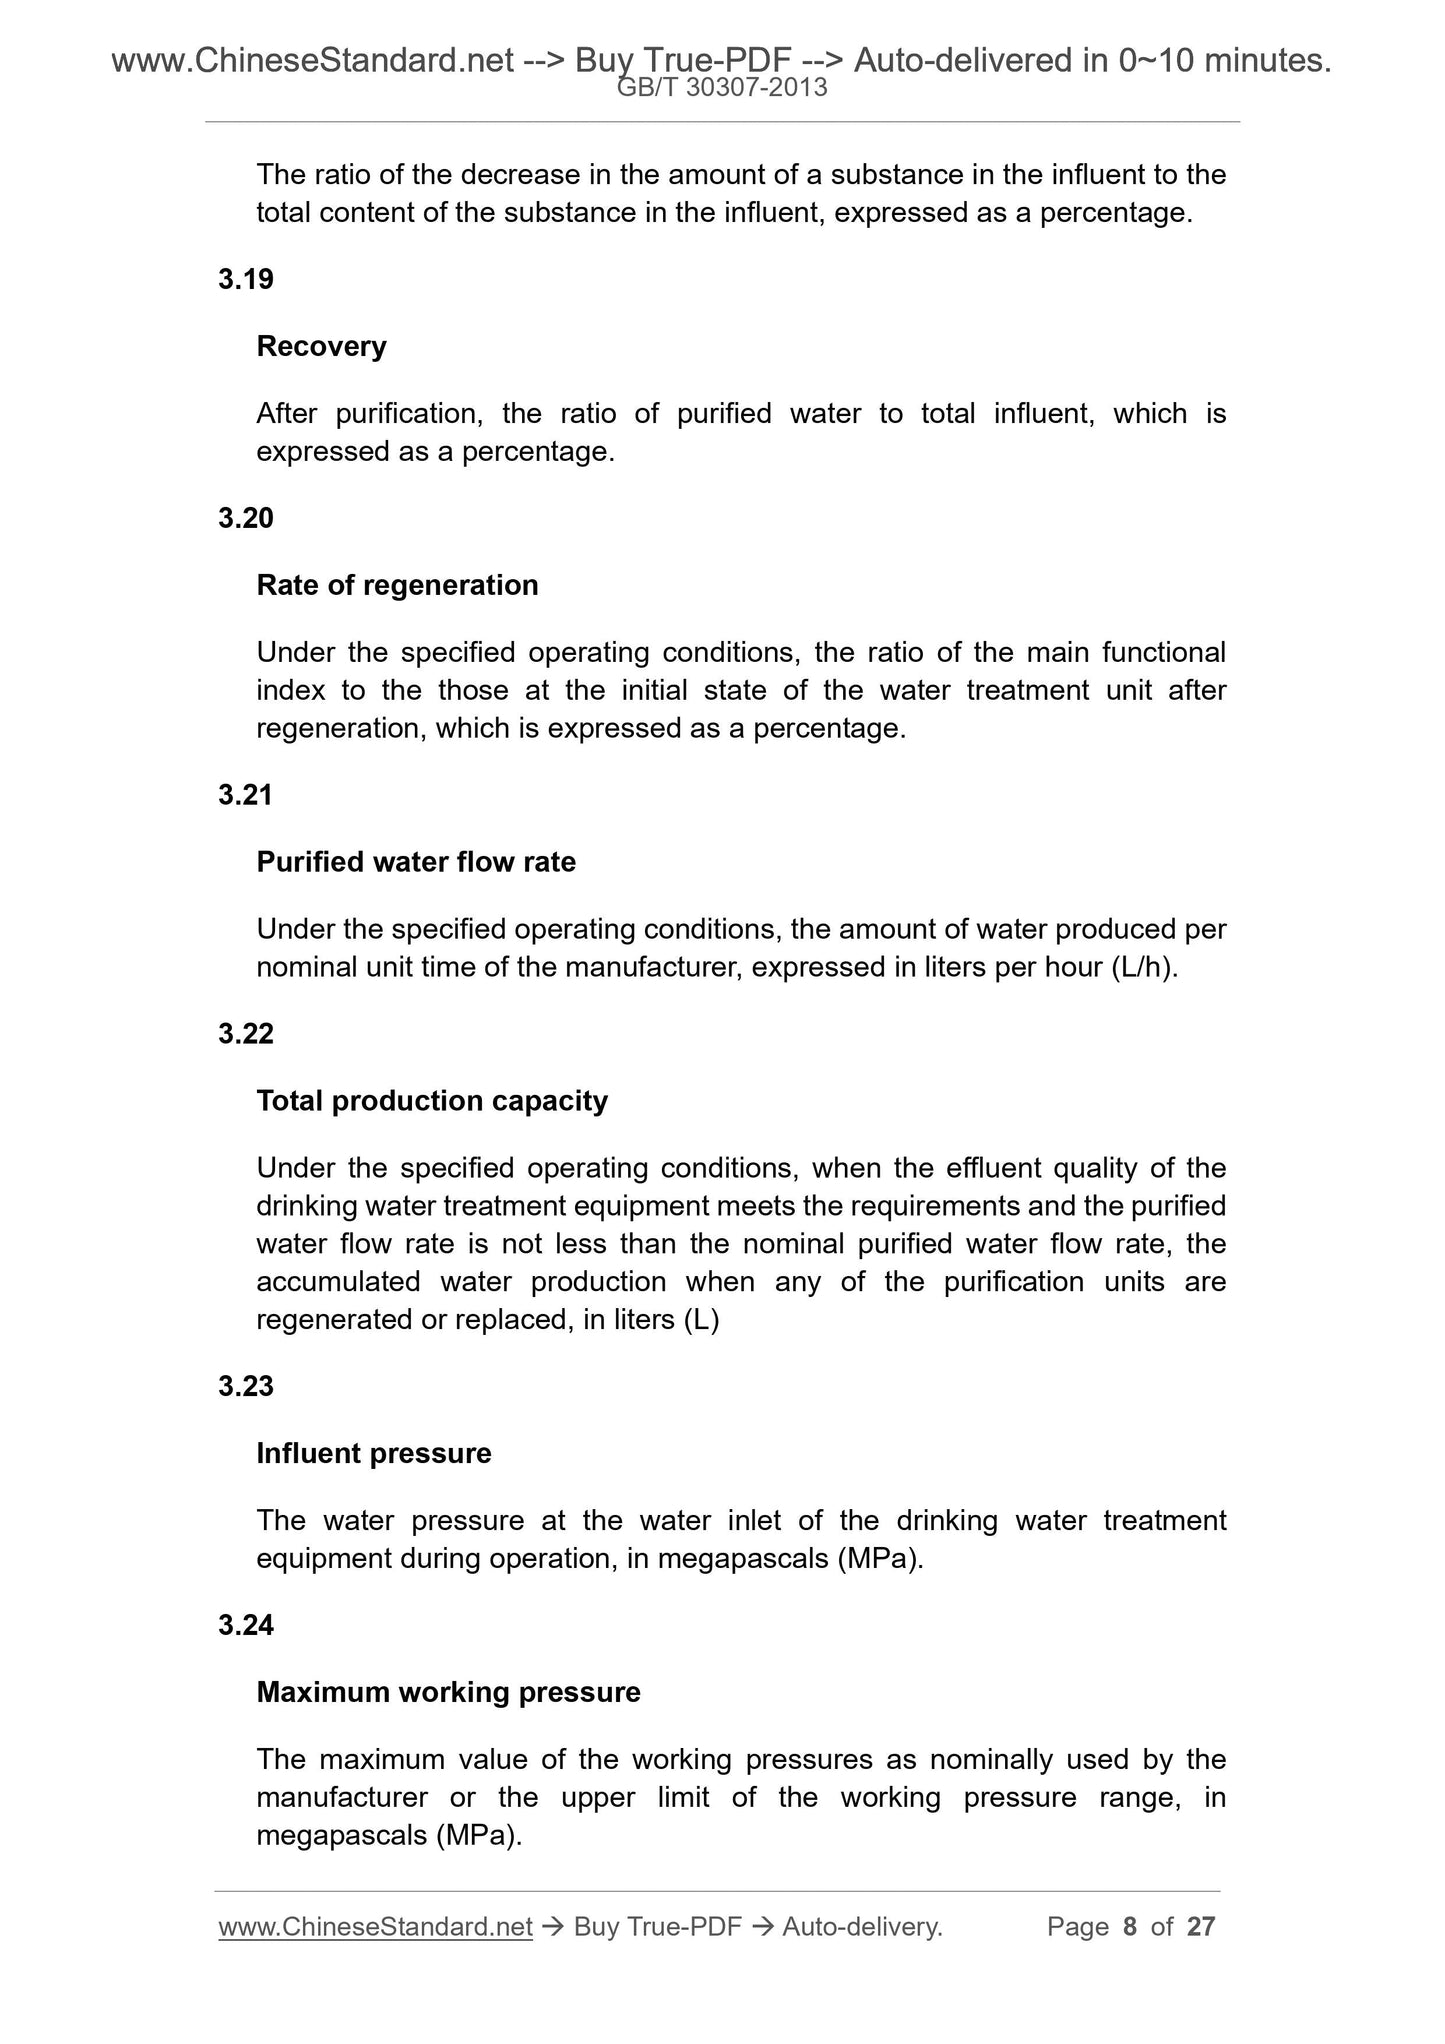 GB/T 30307-2013 Page 5